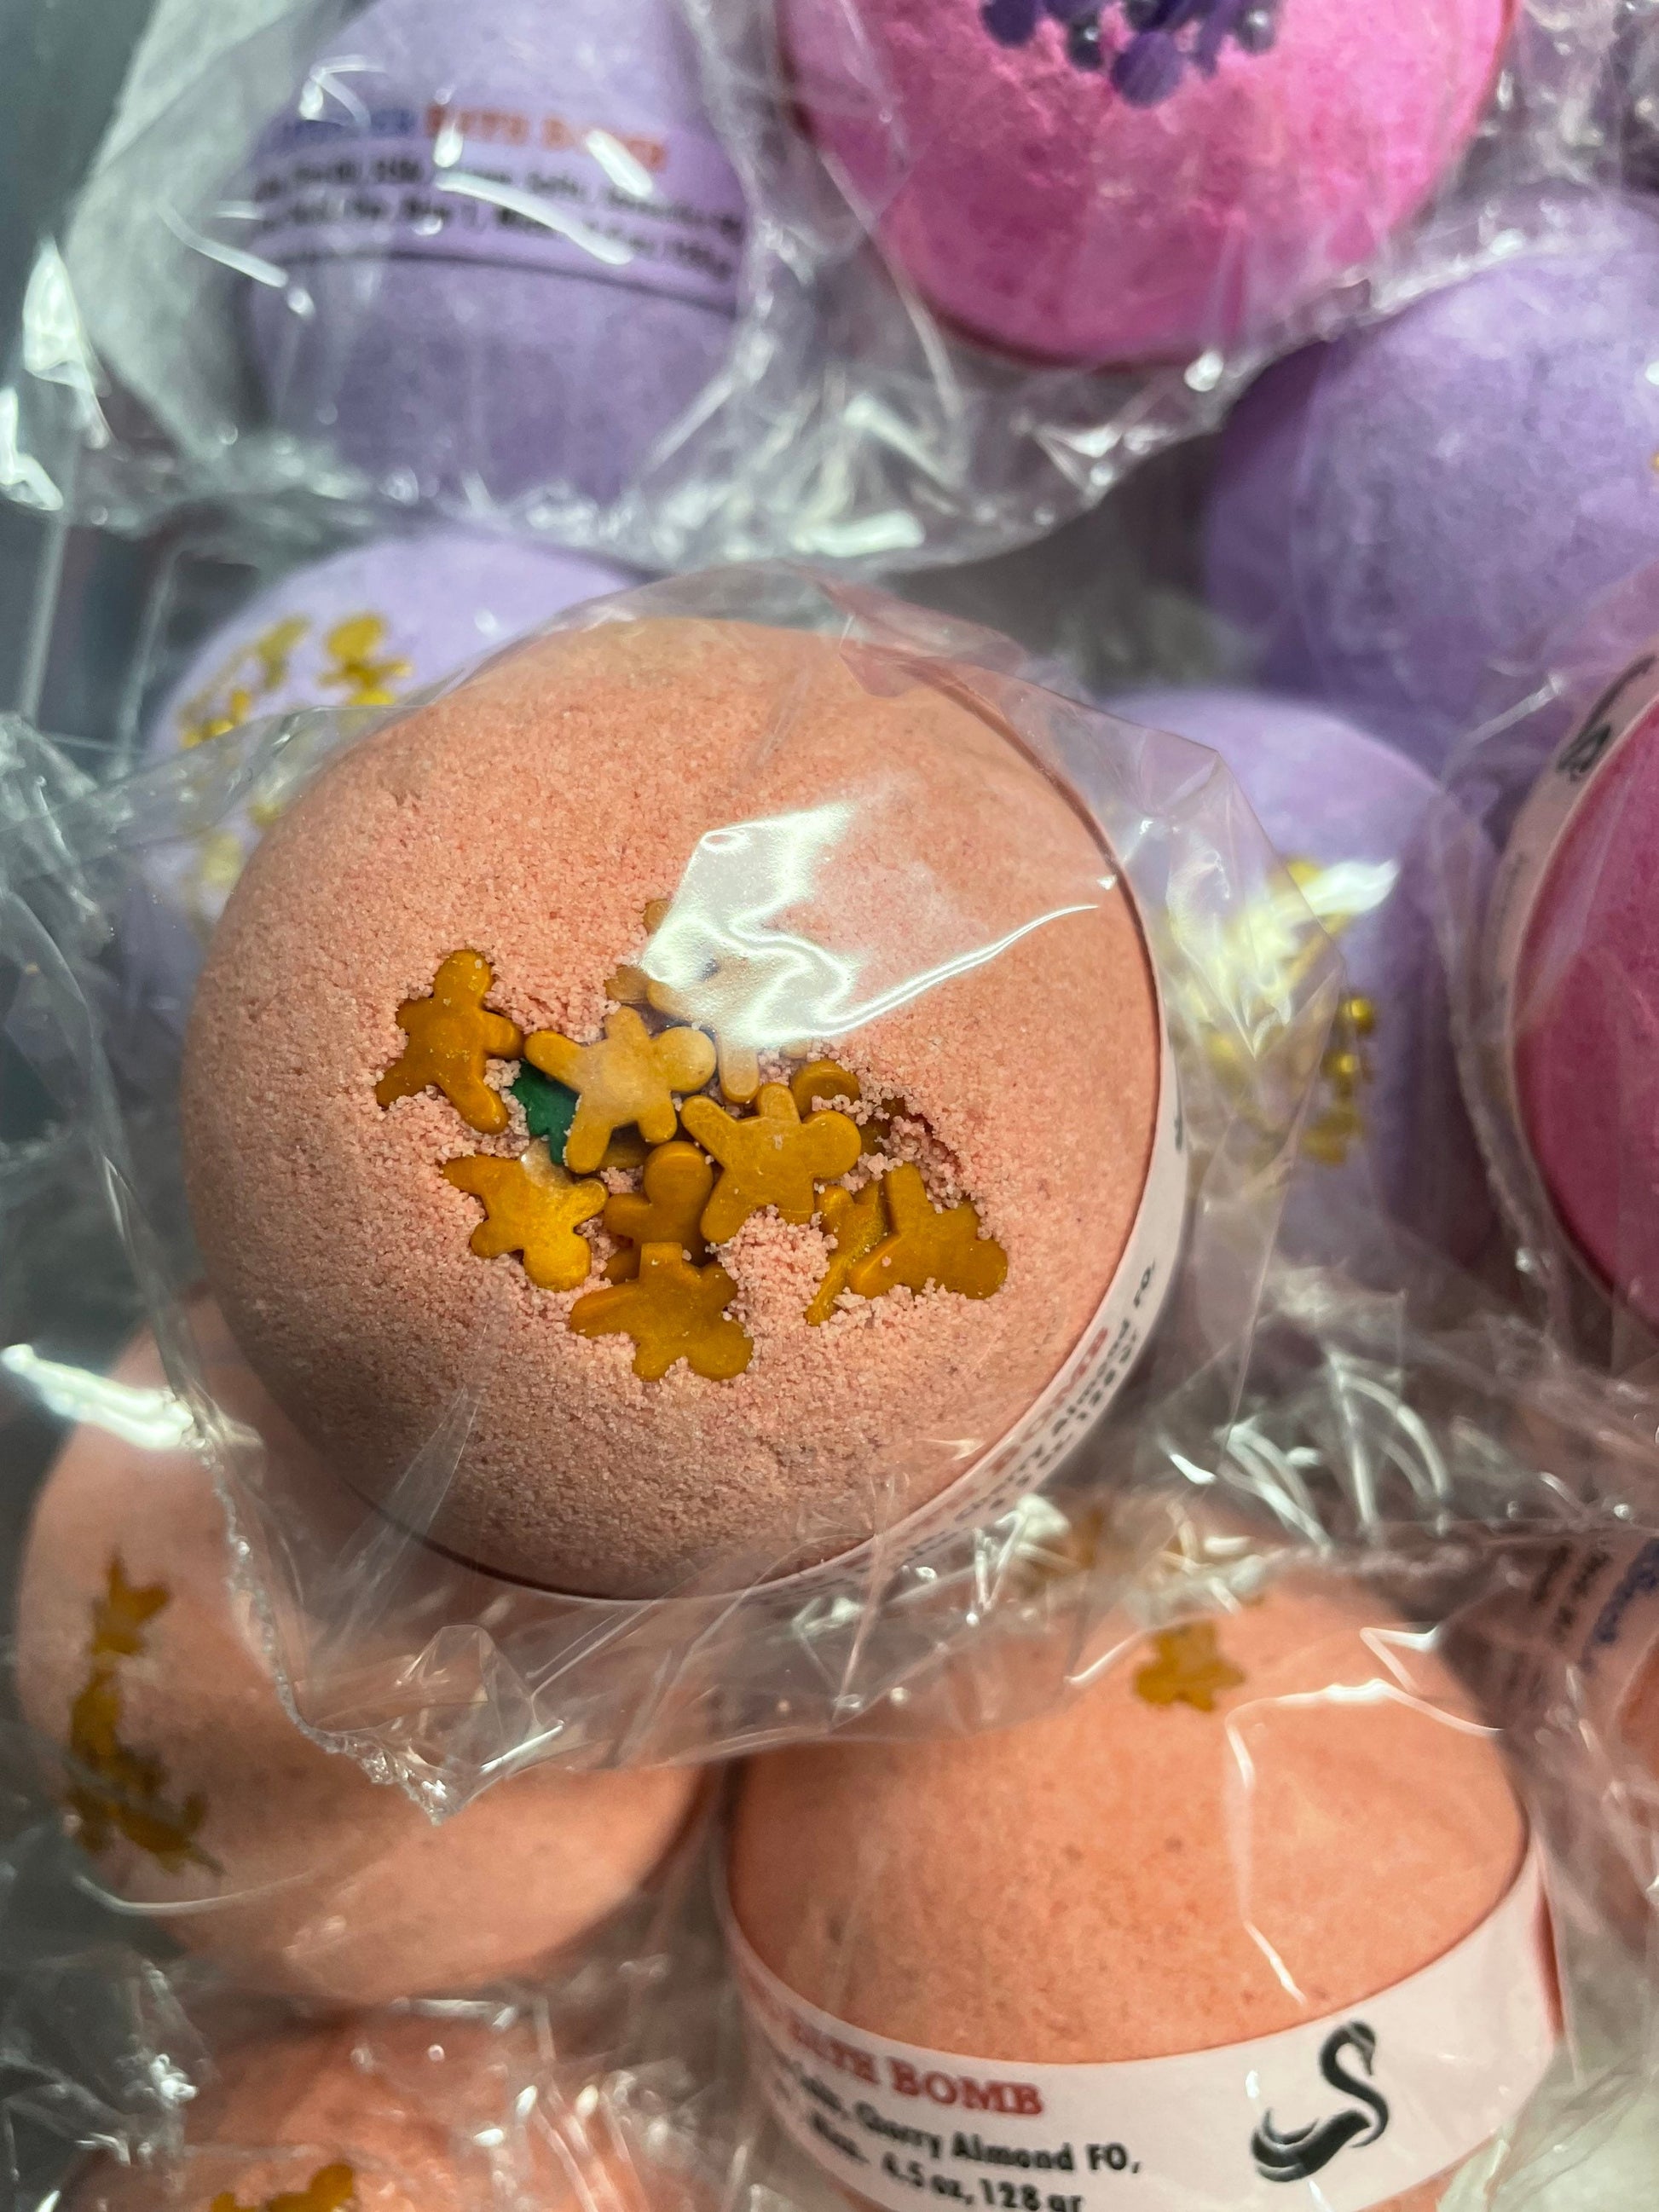 a photo of Cherry Almond Bath Bombs with Embeds and sugar sprinkles of gingerbread men